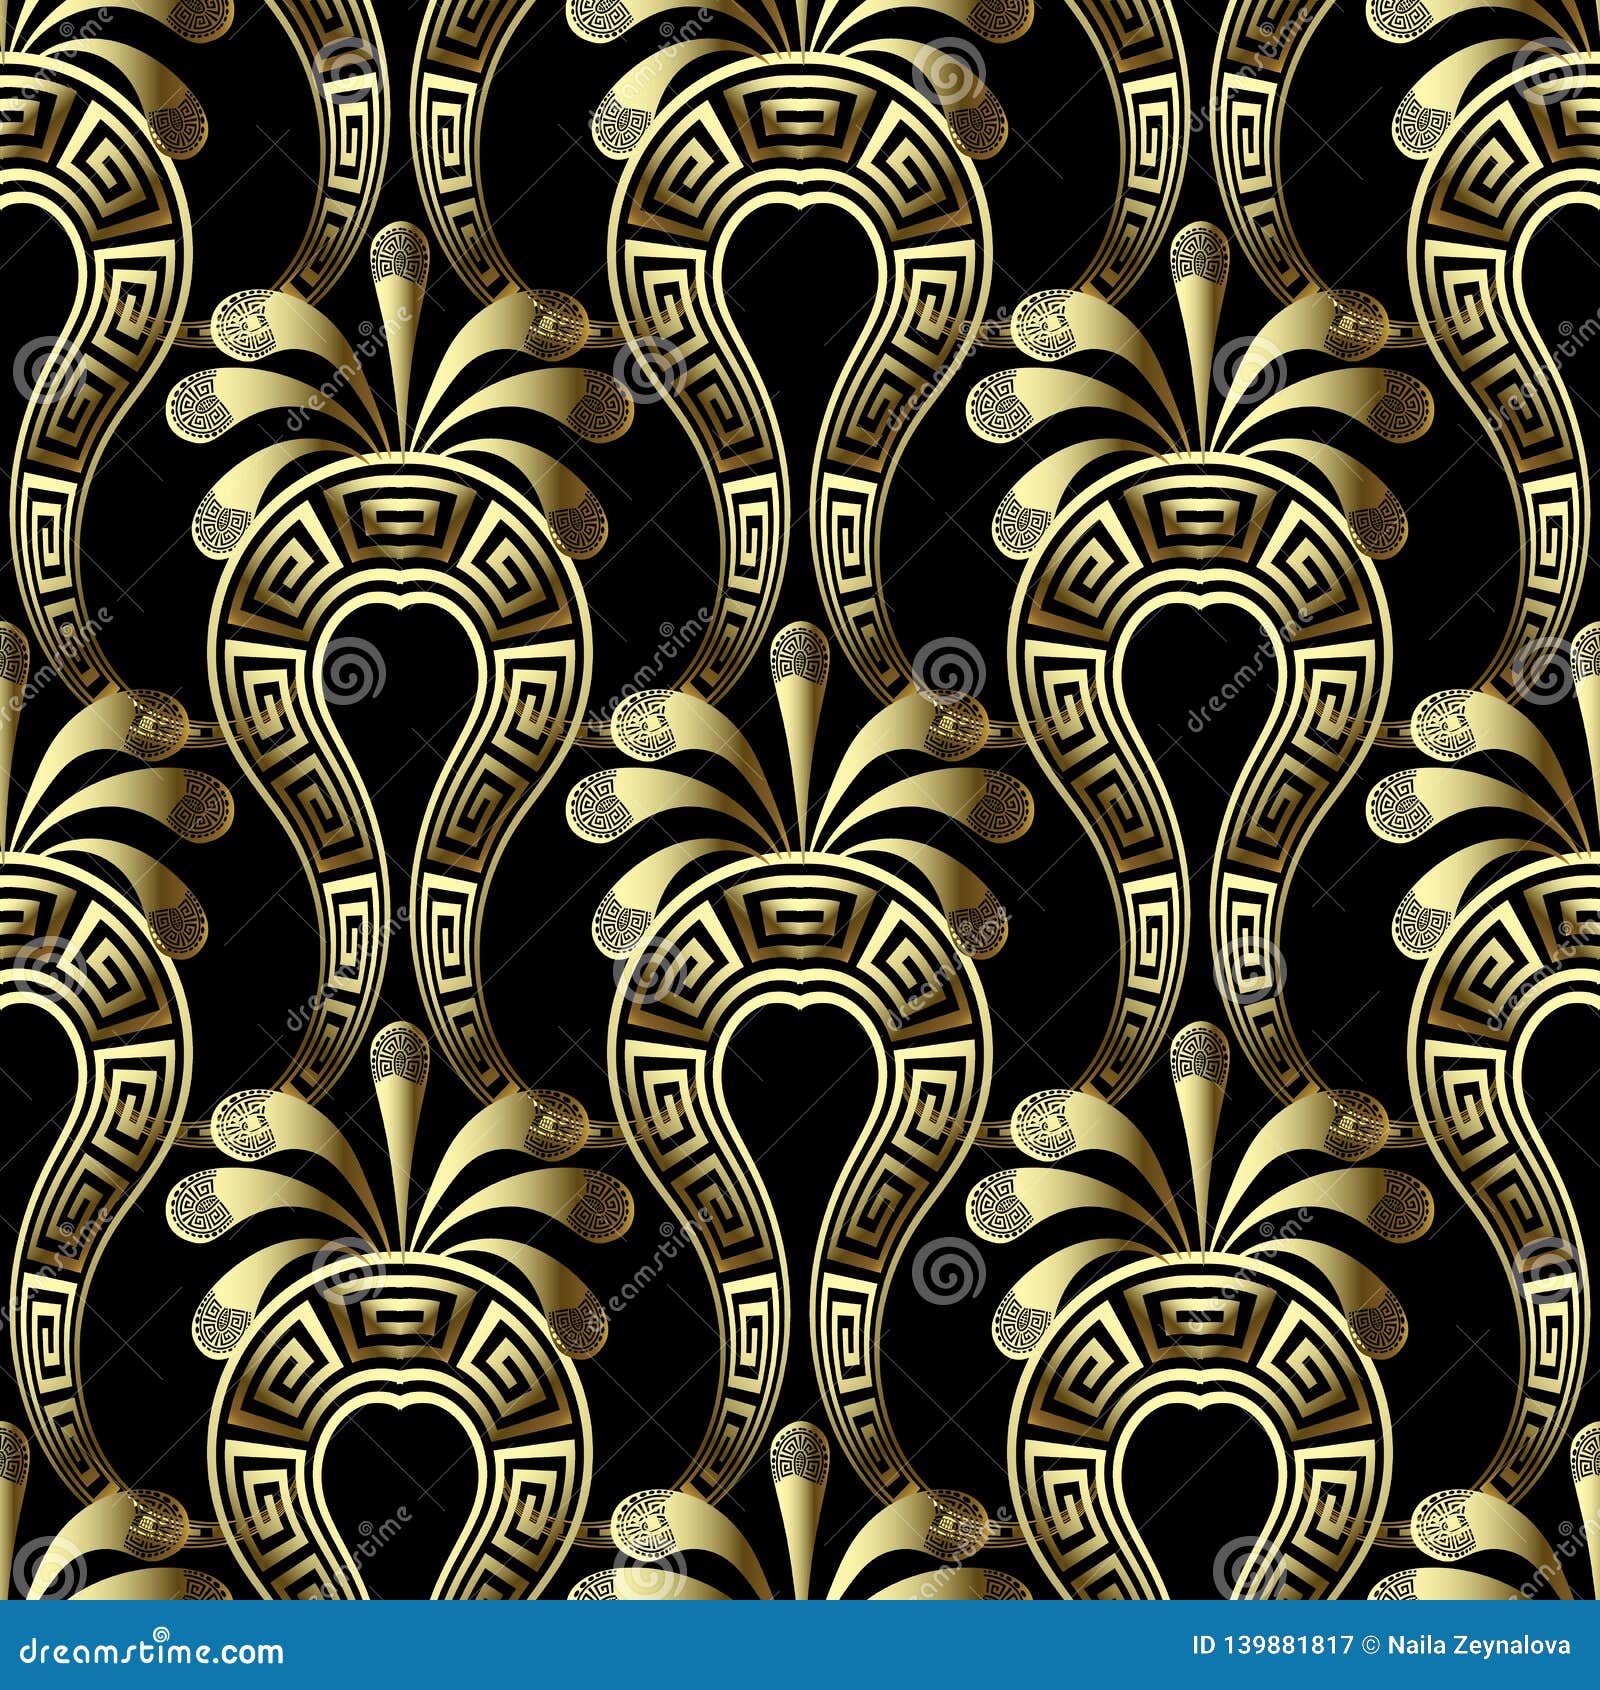 gold floral 3d gree  seamless pattern. ethnic style arabesque background with paisley flowers. greek key meanders vintage